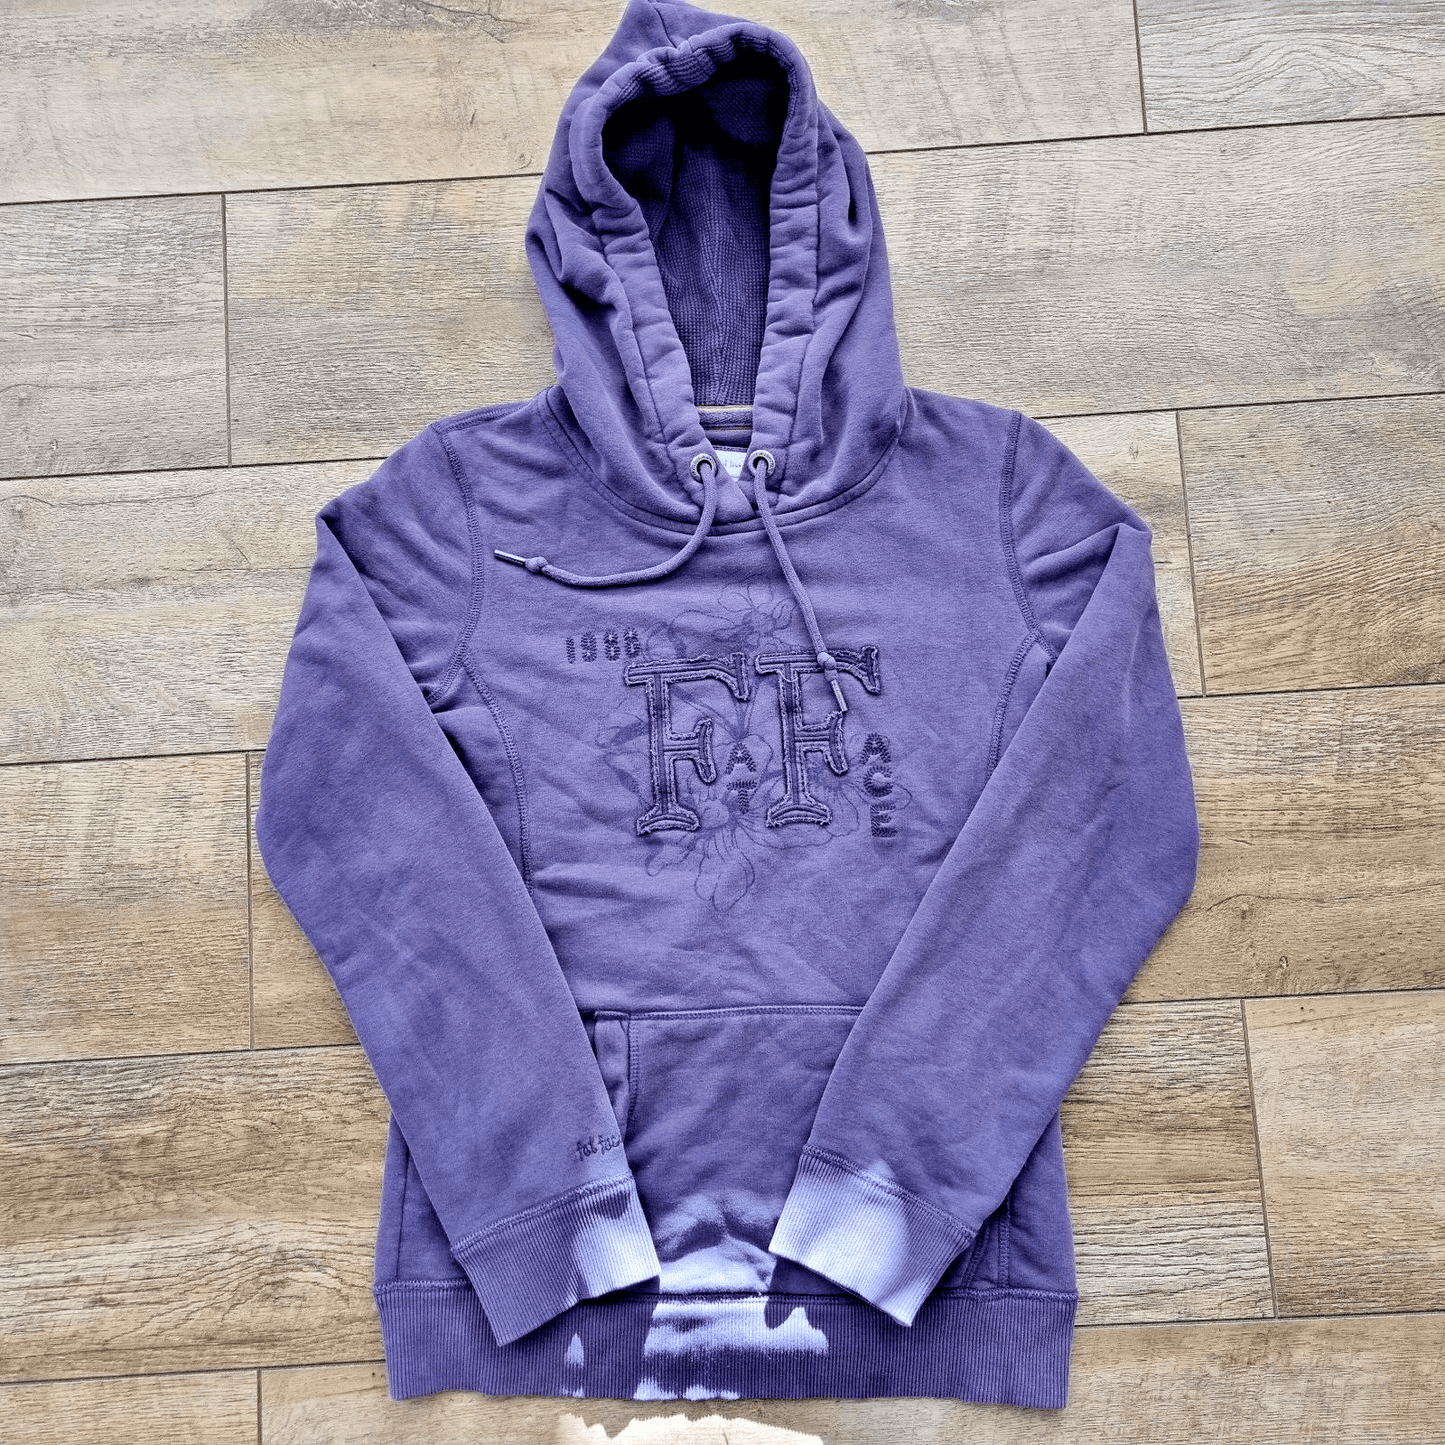 Womens Fat Face Hoodie Size 8 Purple Embroided Lovely Vintage 1988